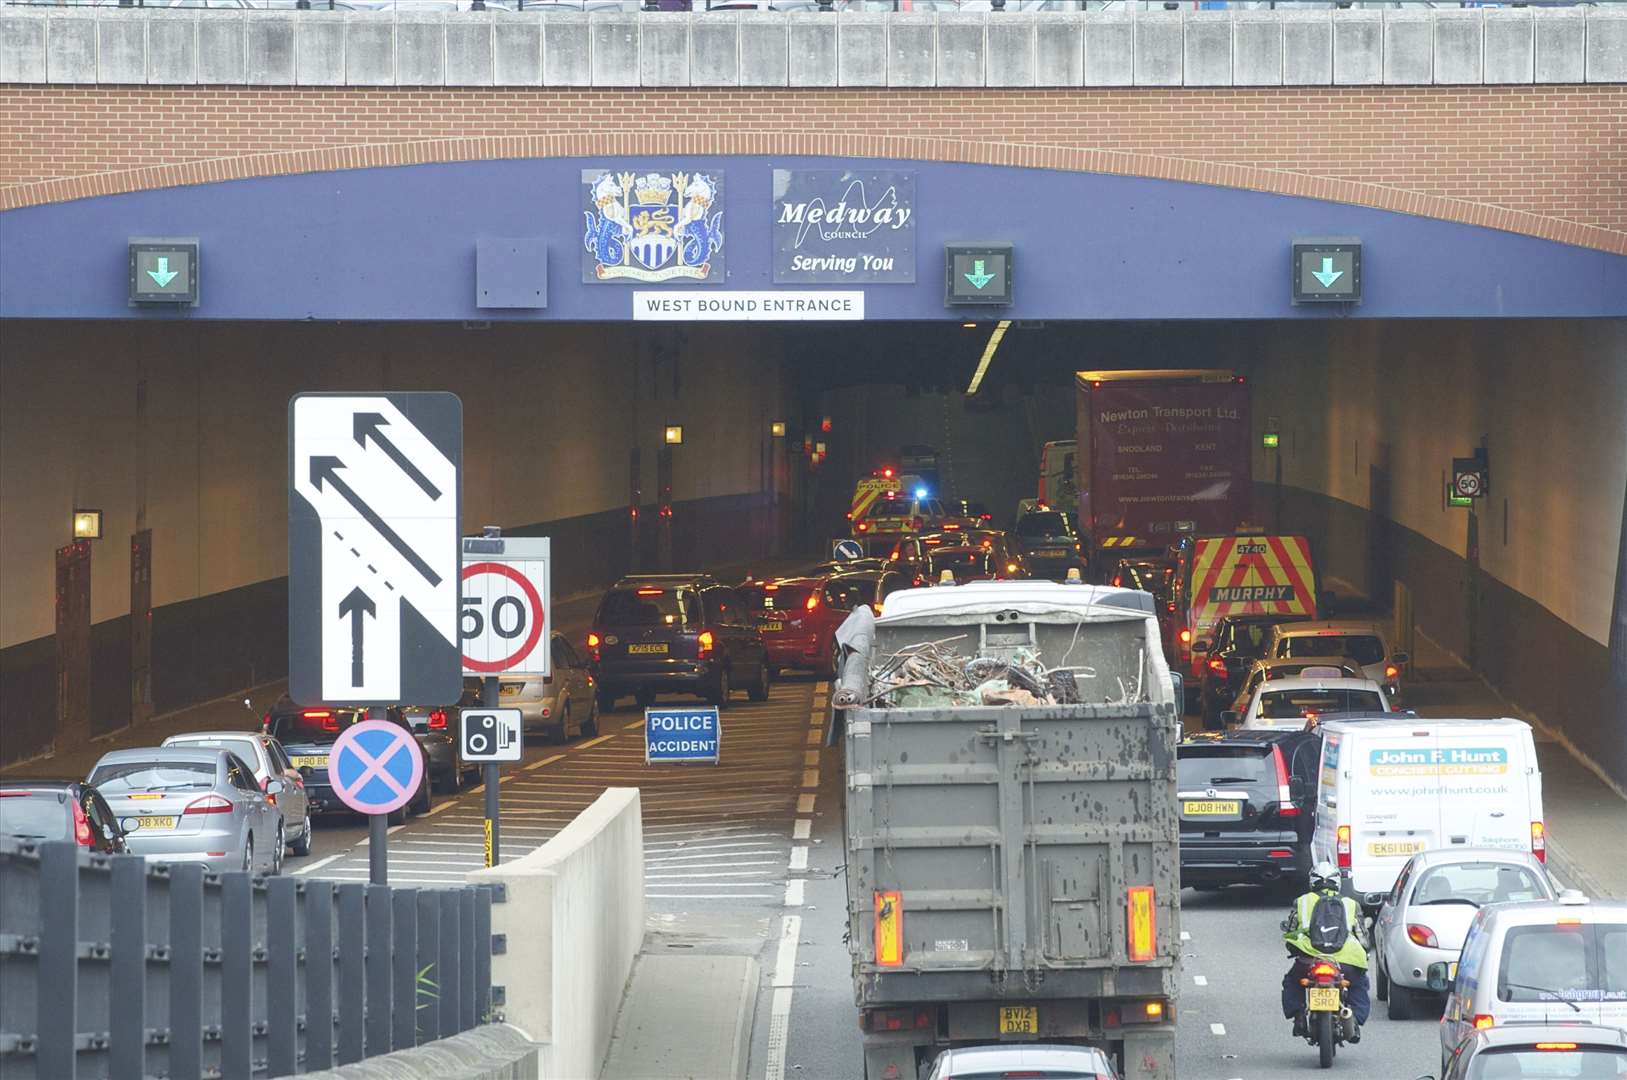 Medway Tunnel costs £415,000 a year to maintain but Labour opposition say the council has yet to secure a suitable long-term funding deal